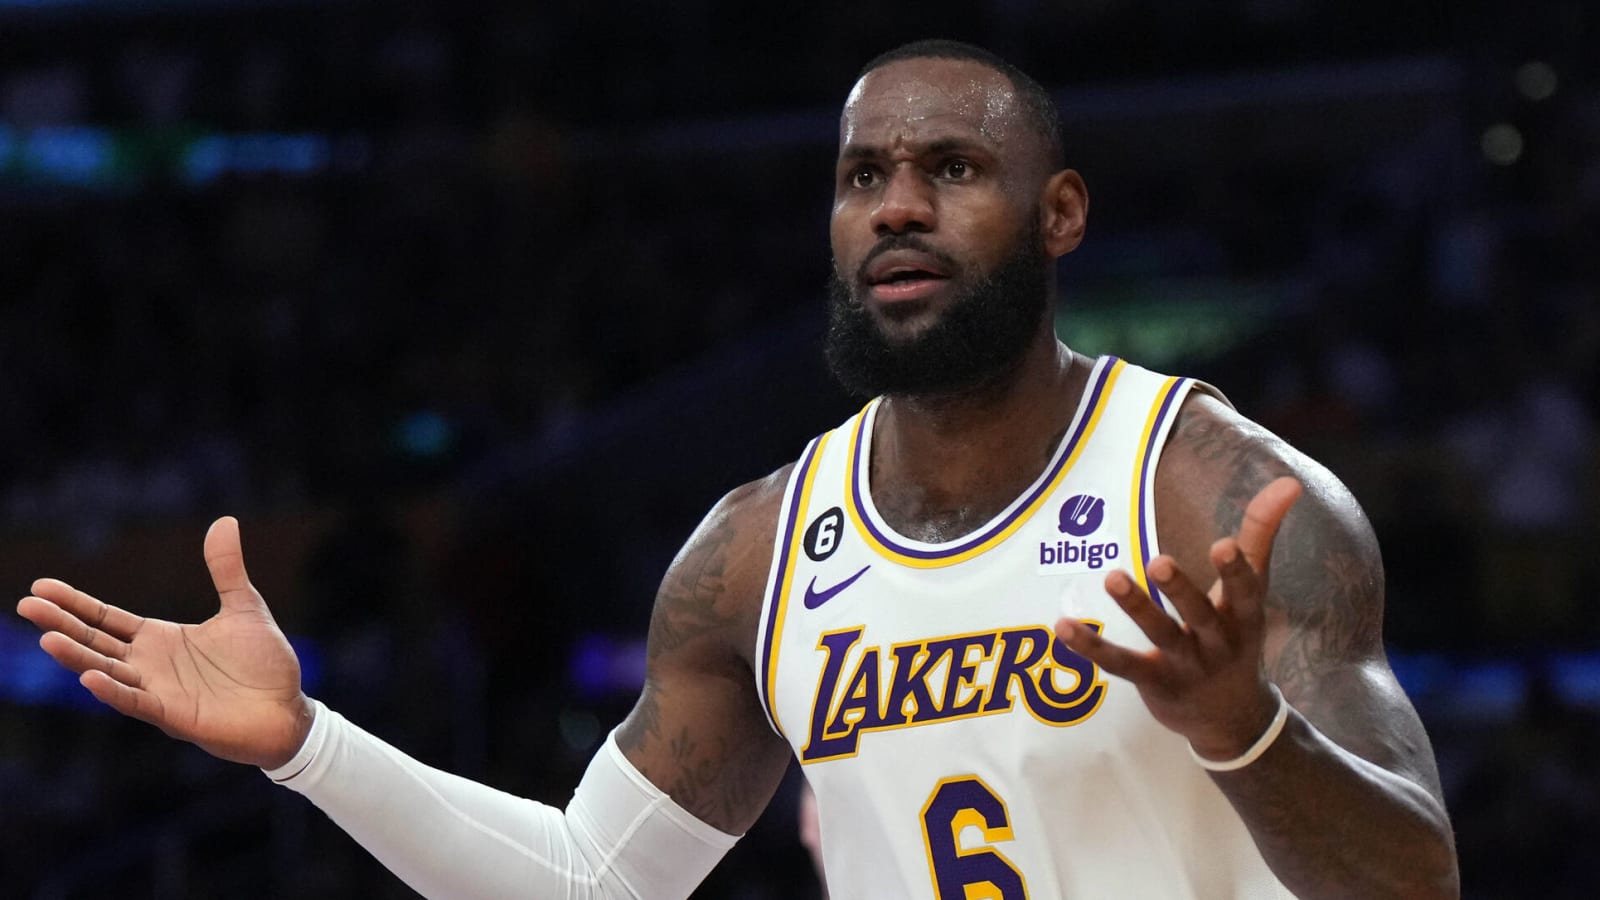 LeBron James explains why he never took part in dunk contest